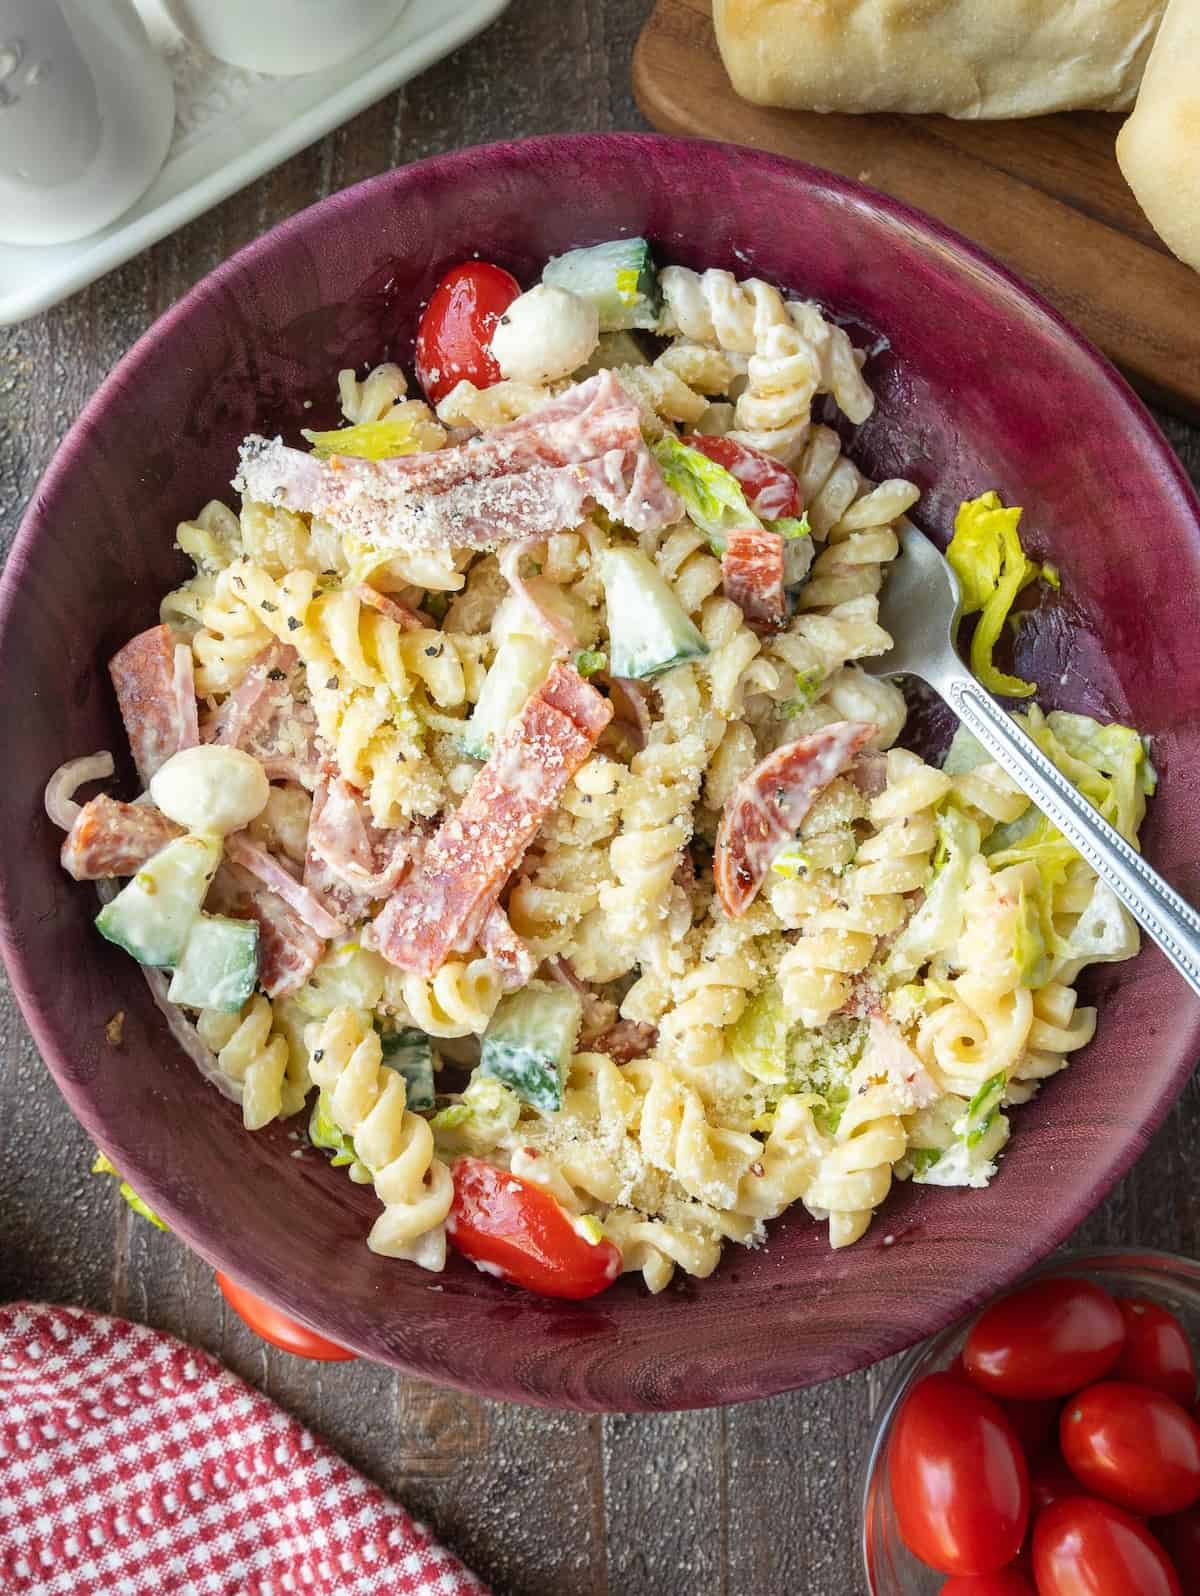 A serving of pasta salad in a bowl.